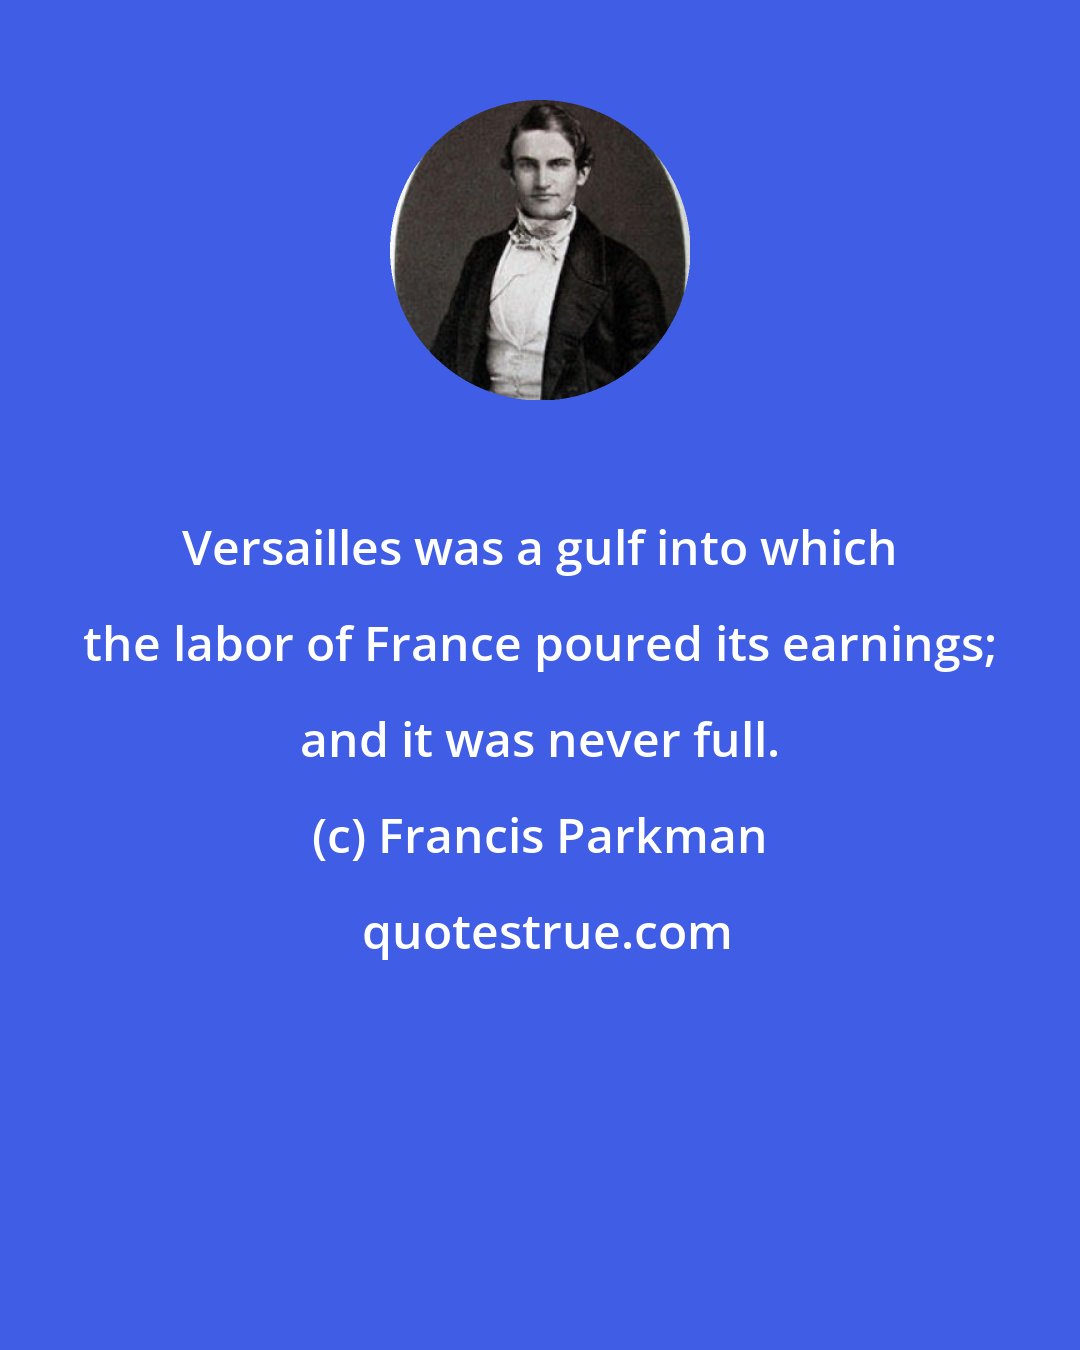 Francis Parkman: Versailles was a gulf into which the labor of France poured its earnings; and it was never full.